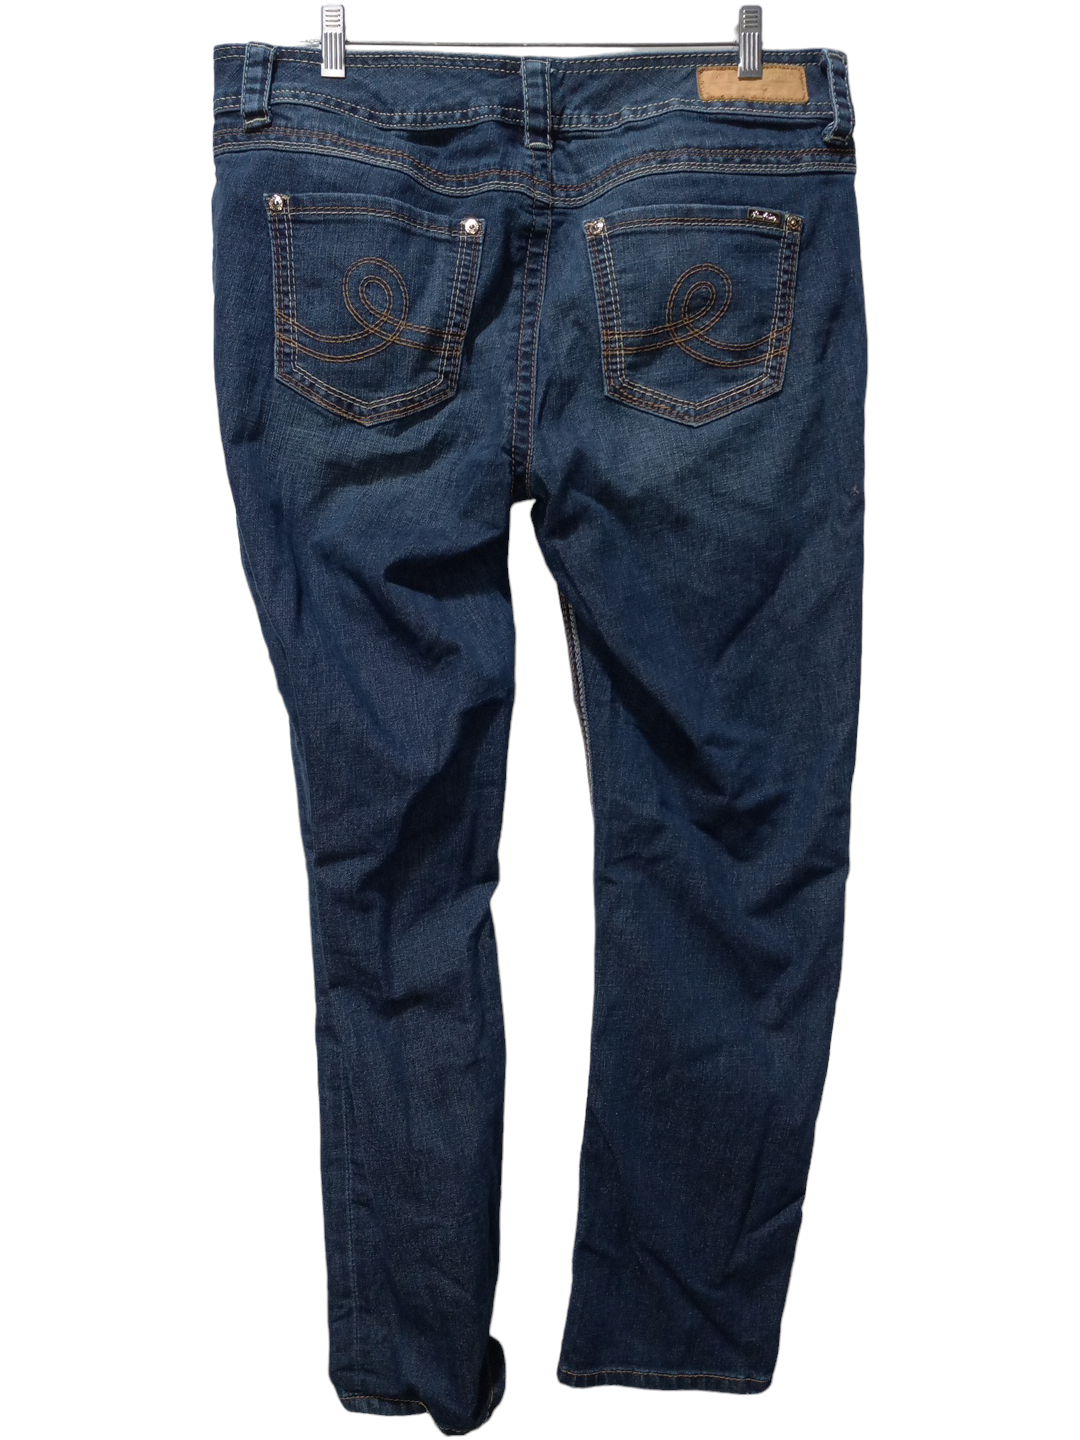 Jeans Straight By Melissa Mccarthy  Size: 16w